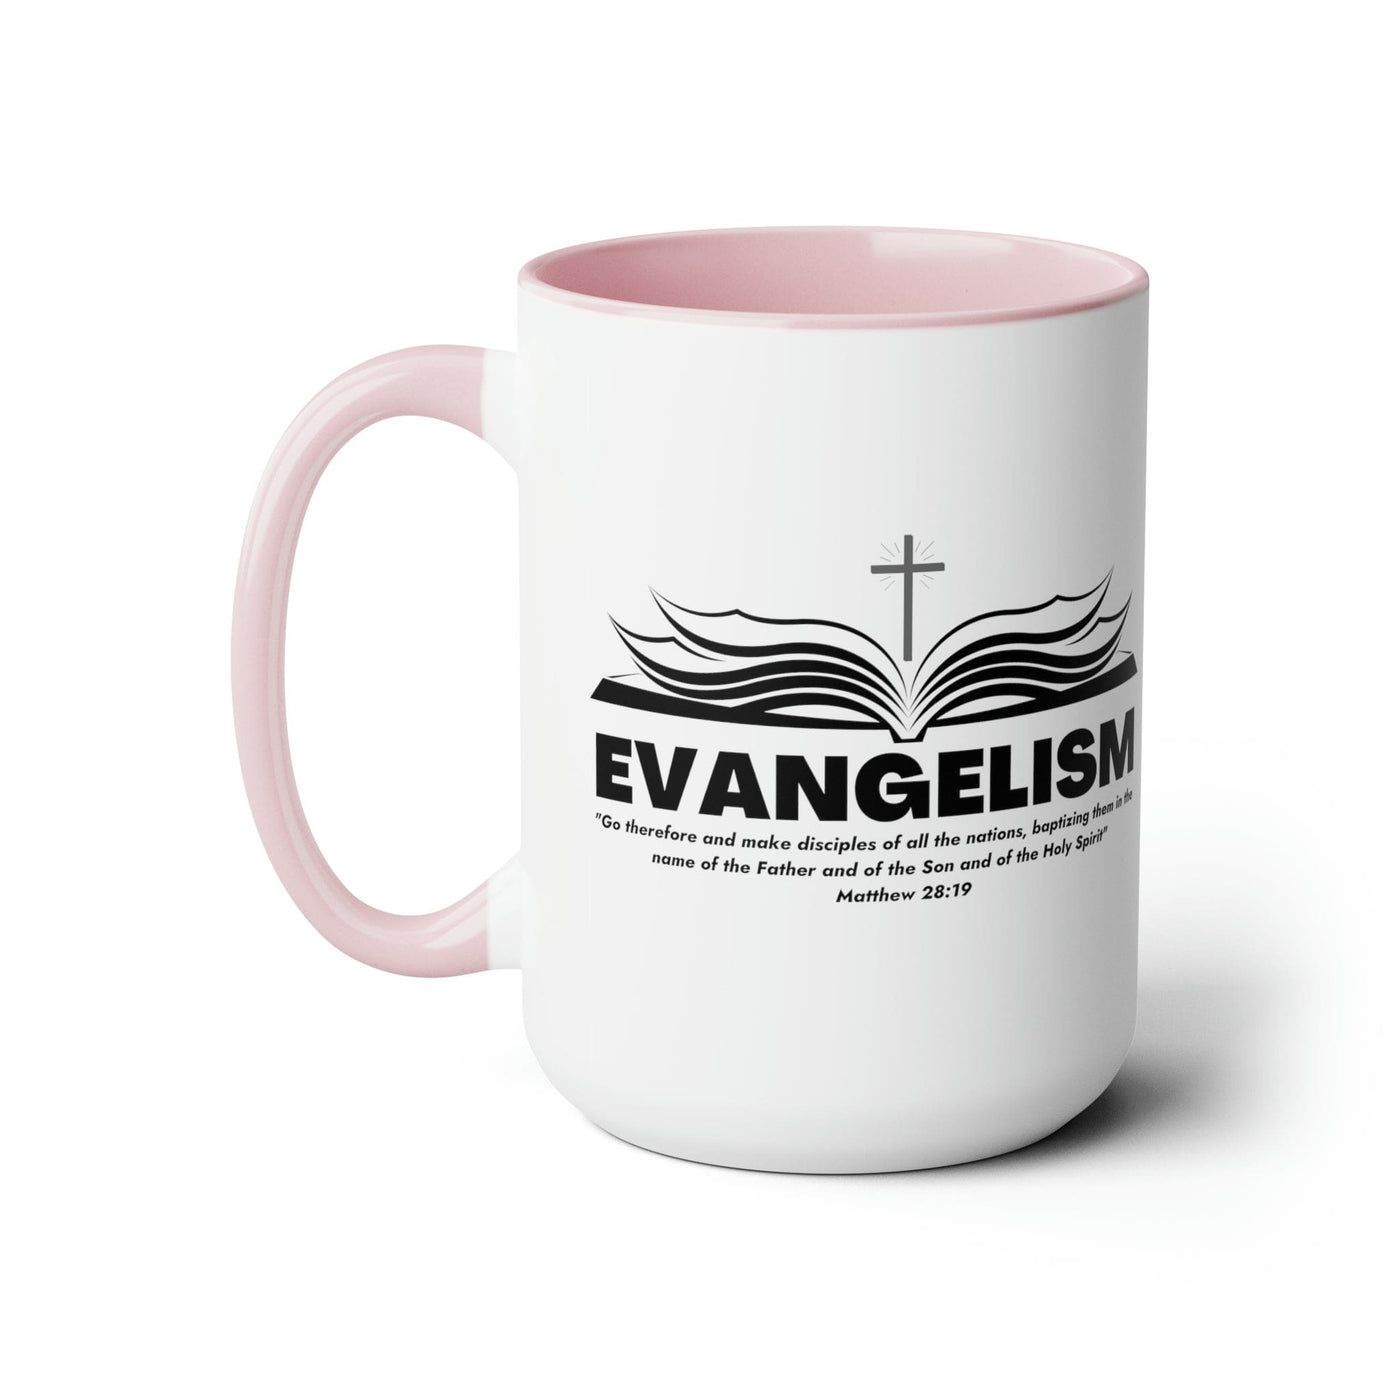 Accent Ceramic Coffee Mug 15oz - Evangelism - Go Therefore And Make Disciples -